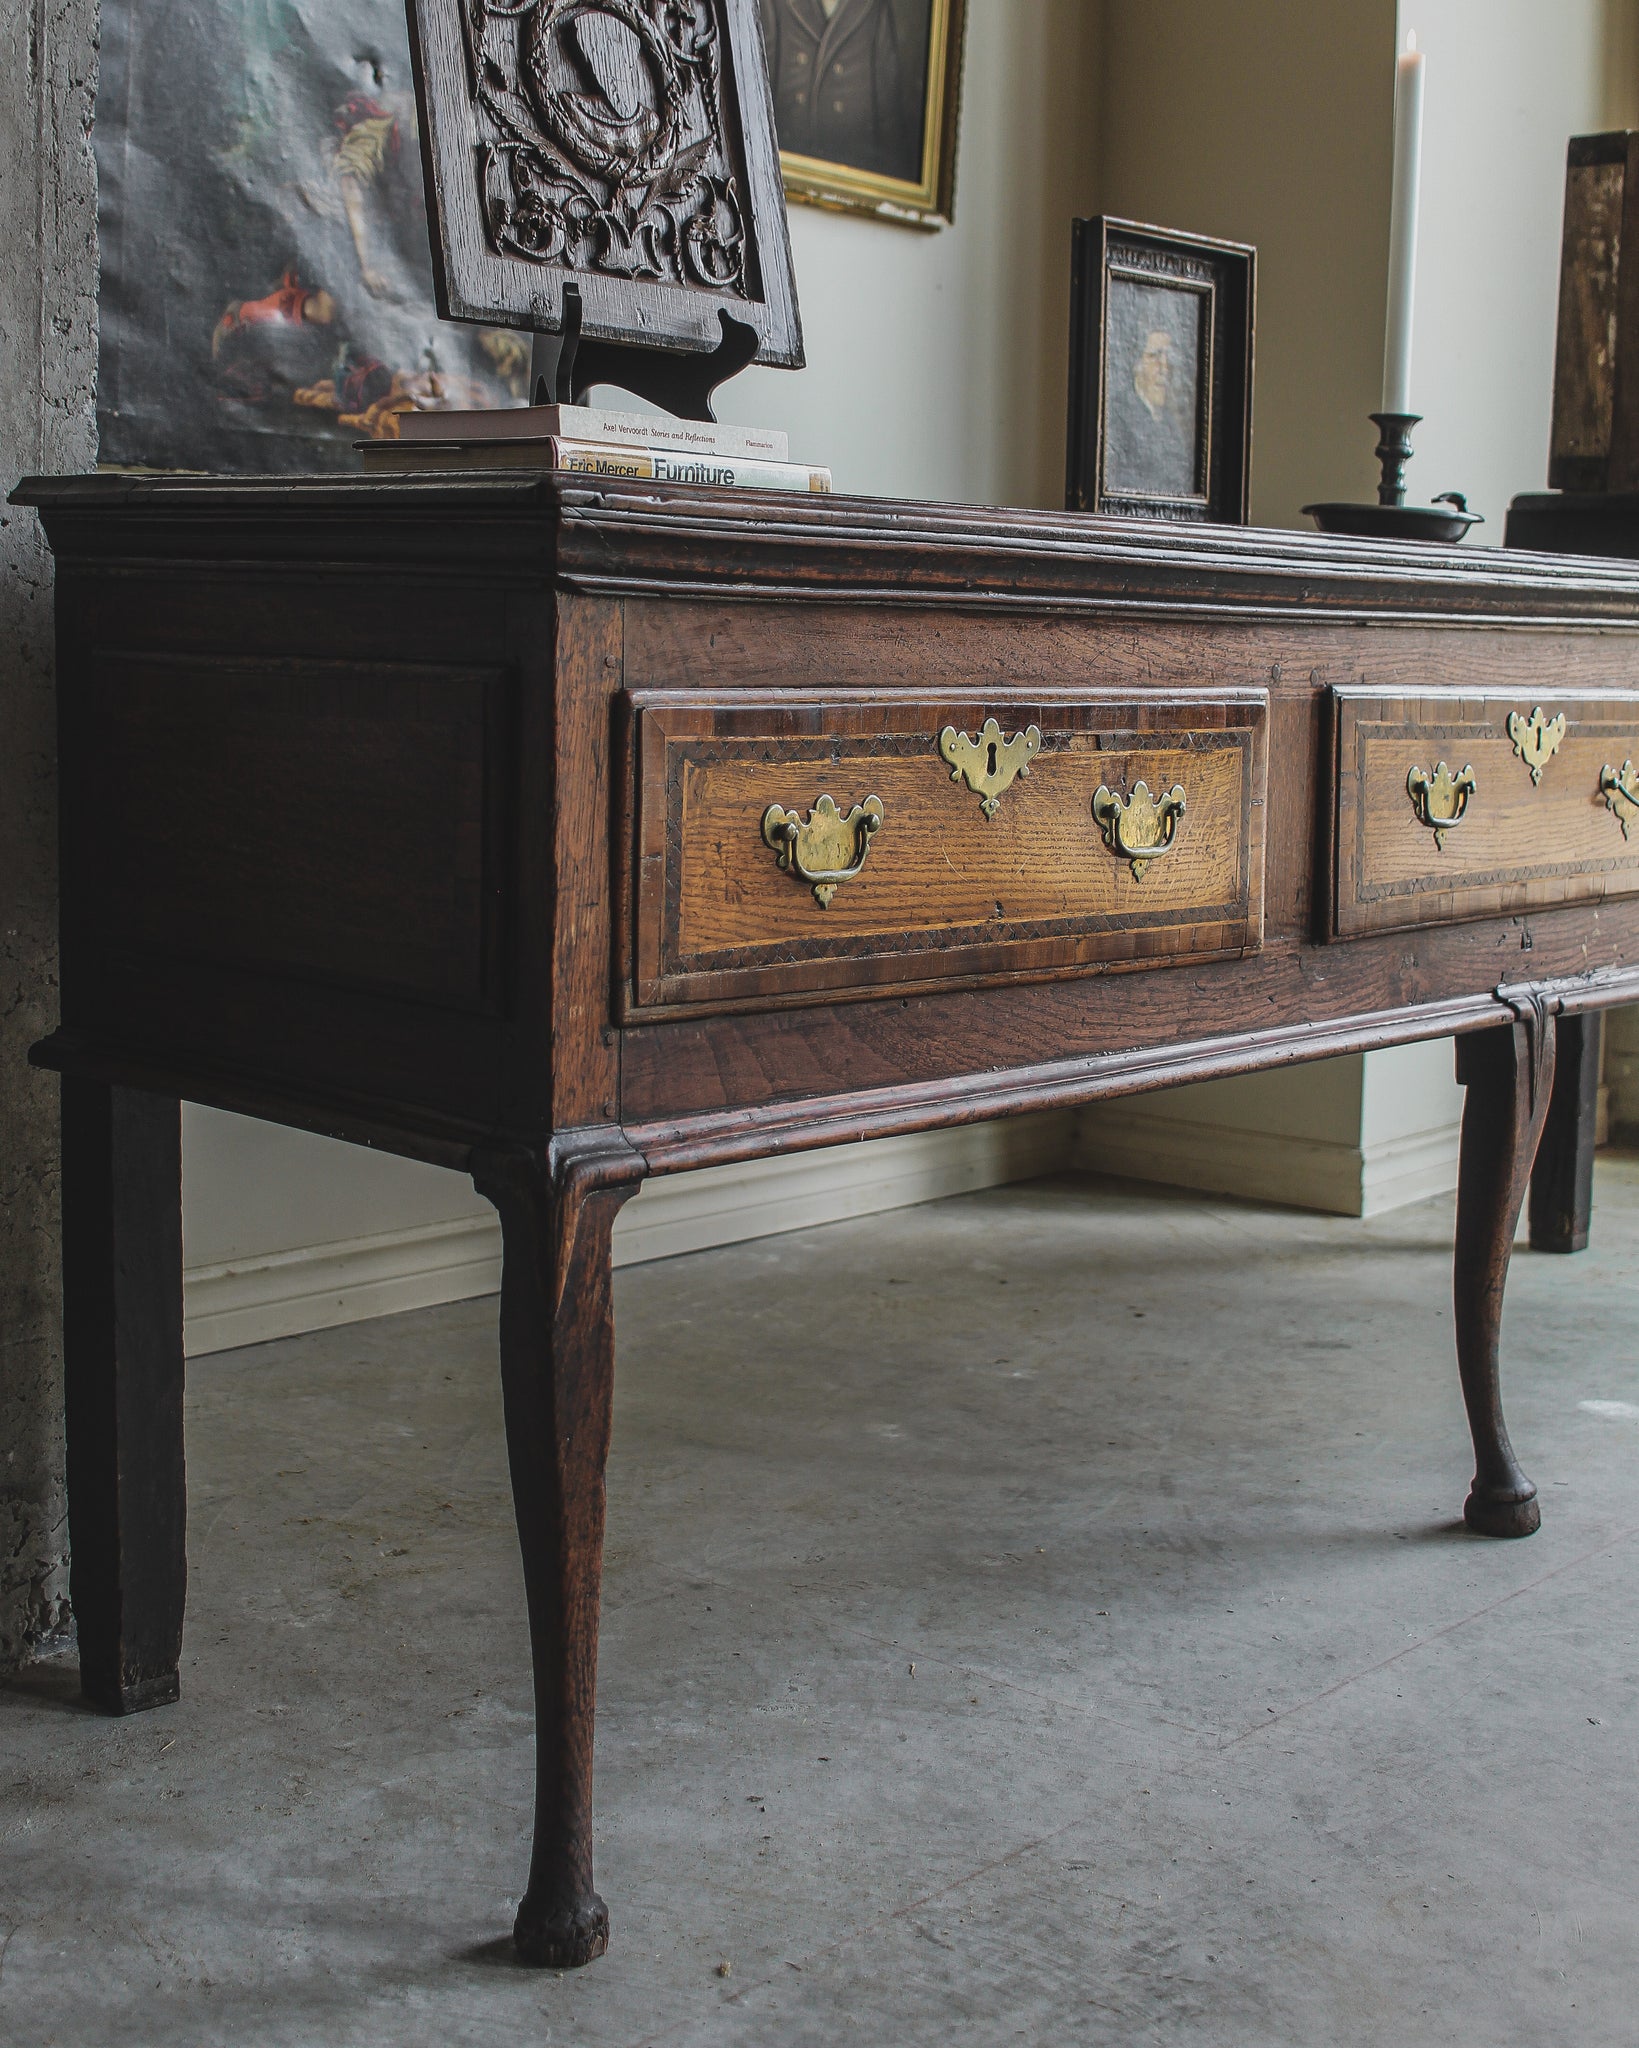 George II Console Table